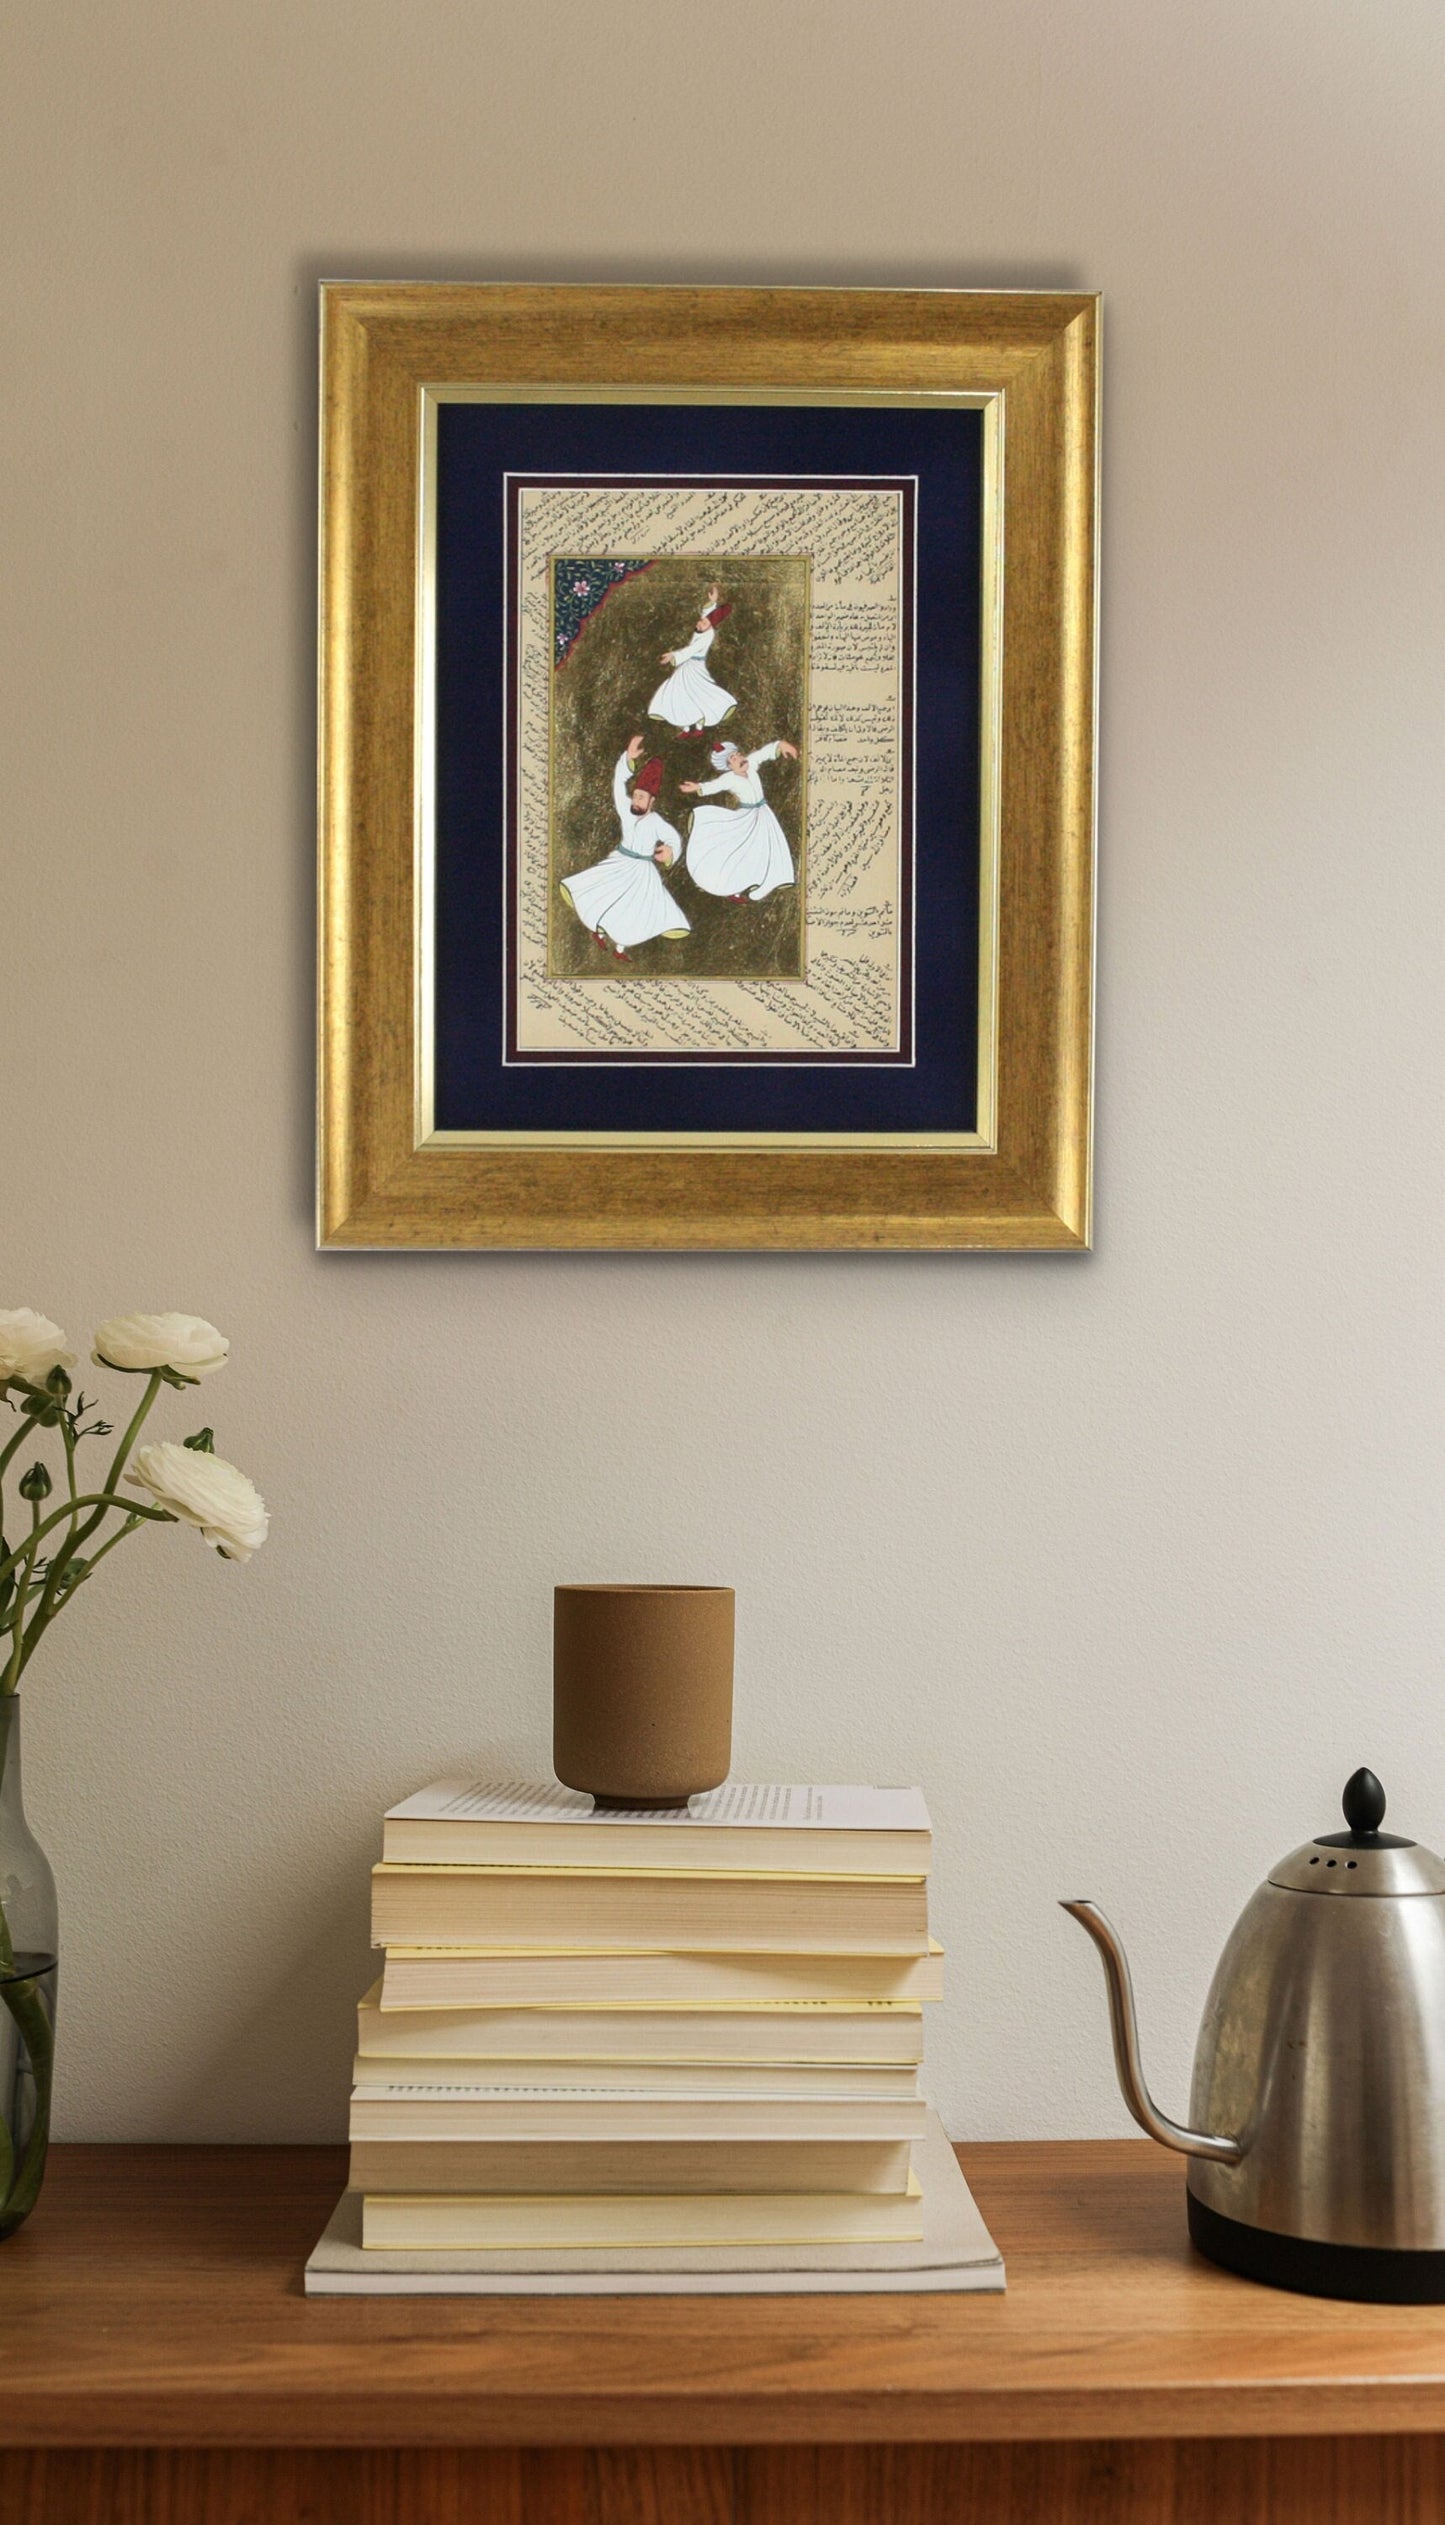 Vintage Spiritual Islamic Wall Art Frame For Home Wall Decor / Rumi Dervishes Painting / Birthday Gift For Her